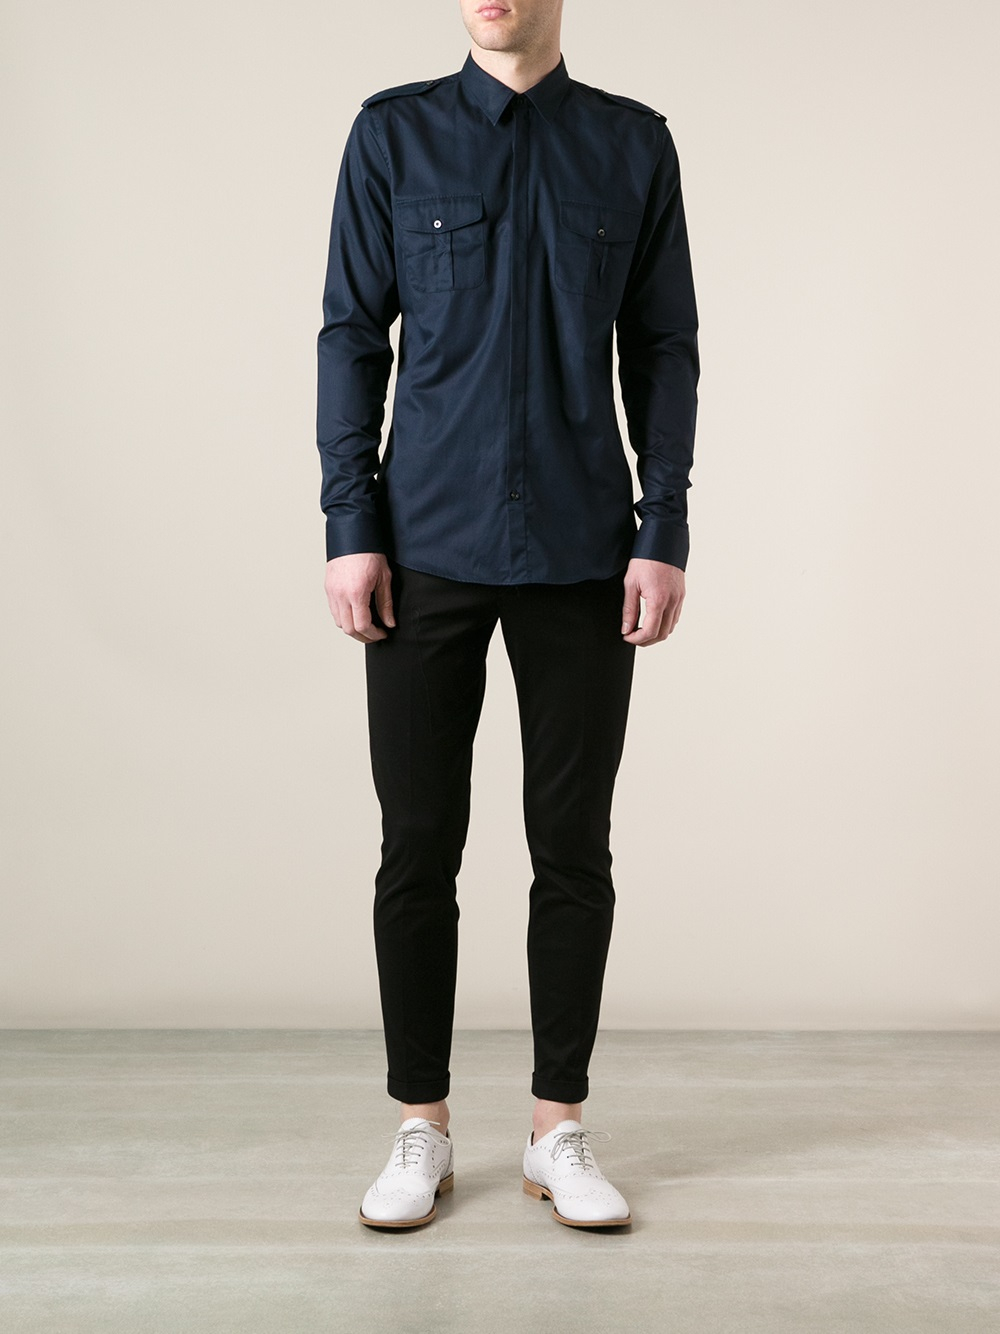 Gucci Military Style Shirt in Blue for Men - Lyst